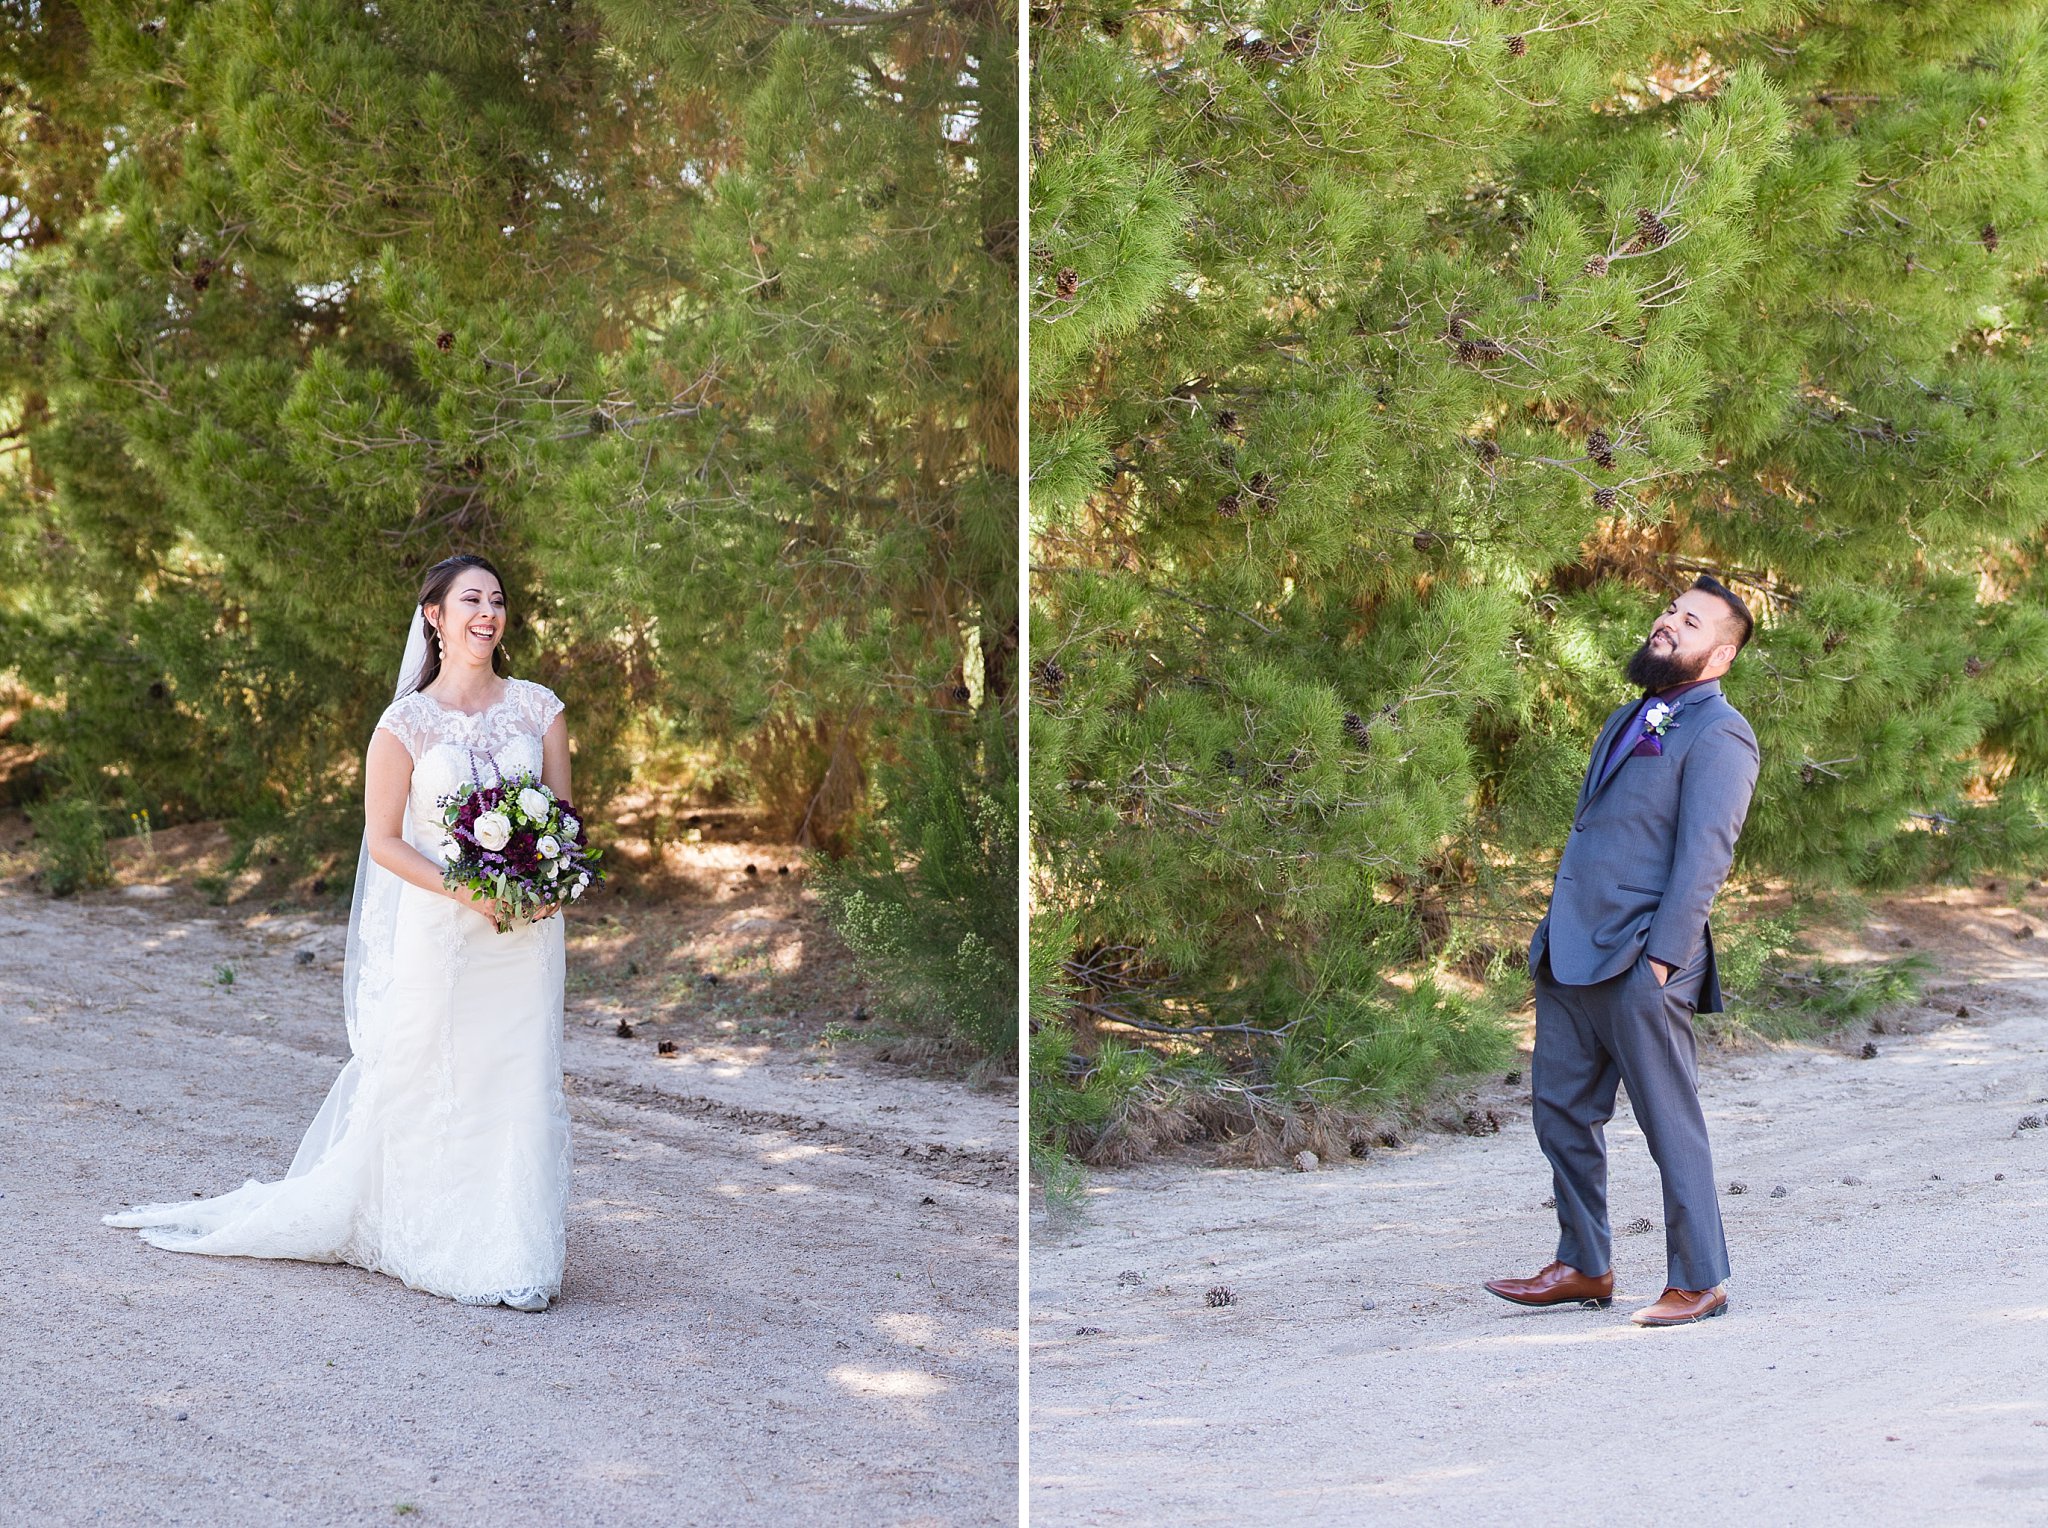 Photos of the bride and groom's expressions seeing each other for the first time during their first look by Arizona wedding photographers PMA Photography.